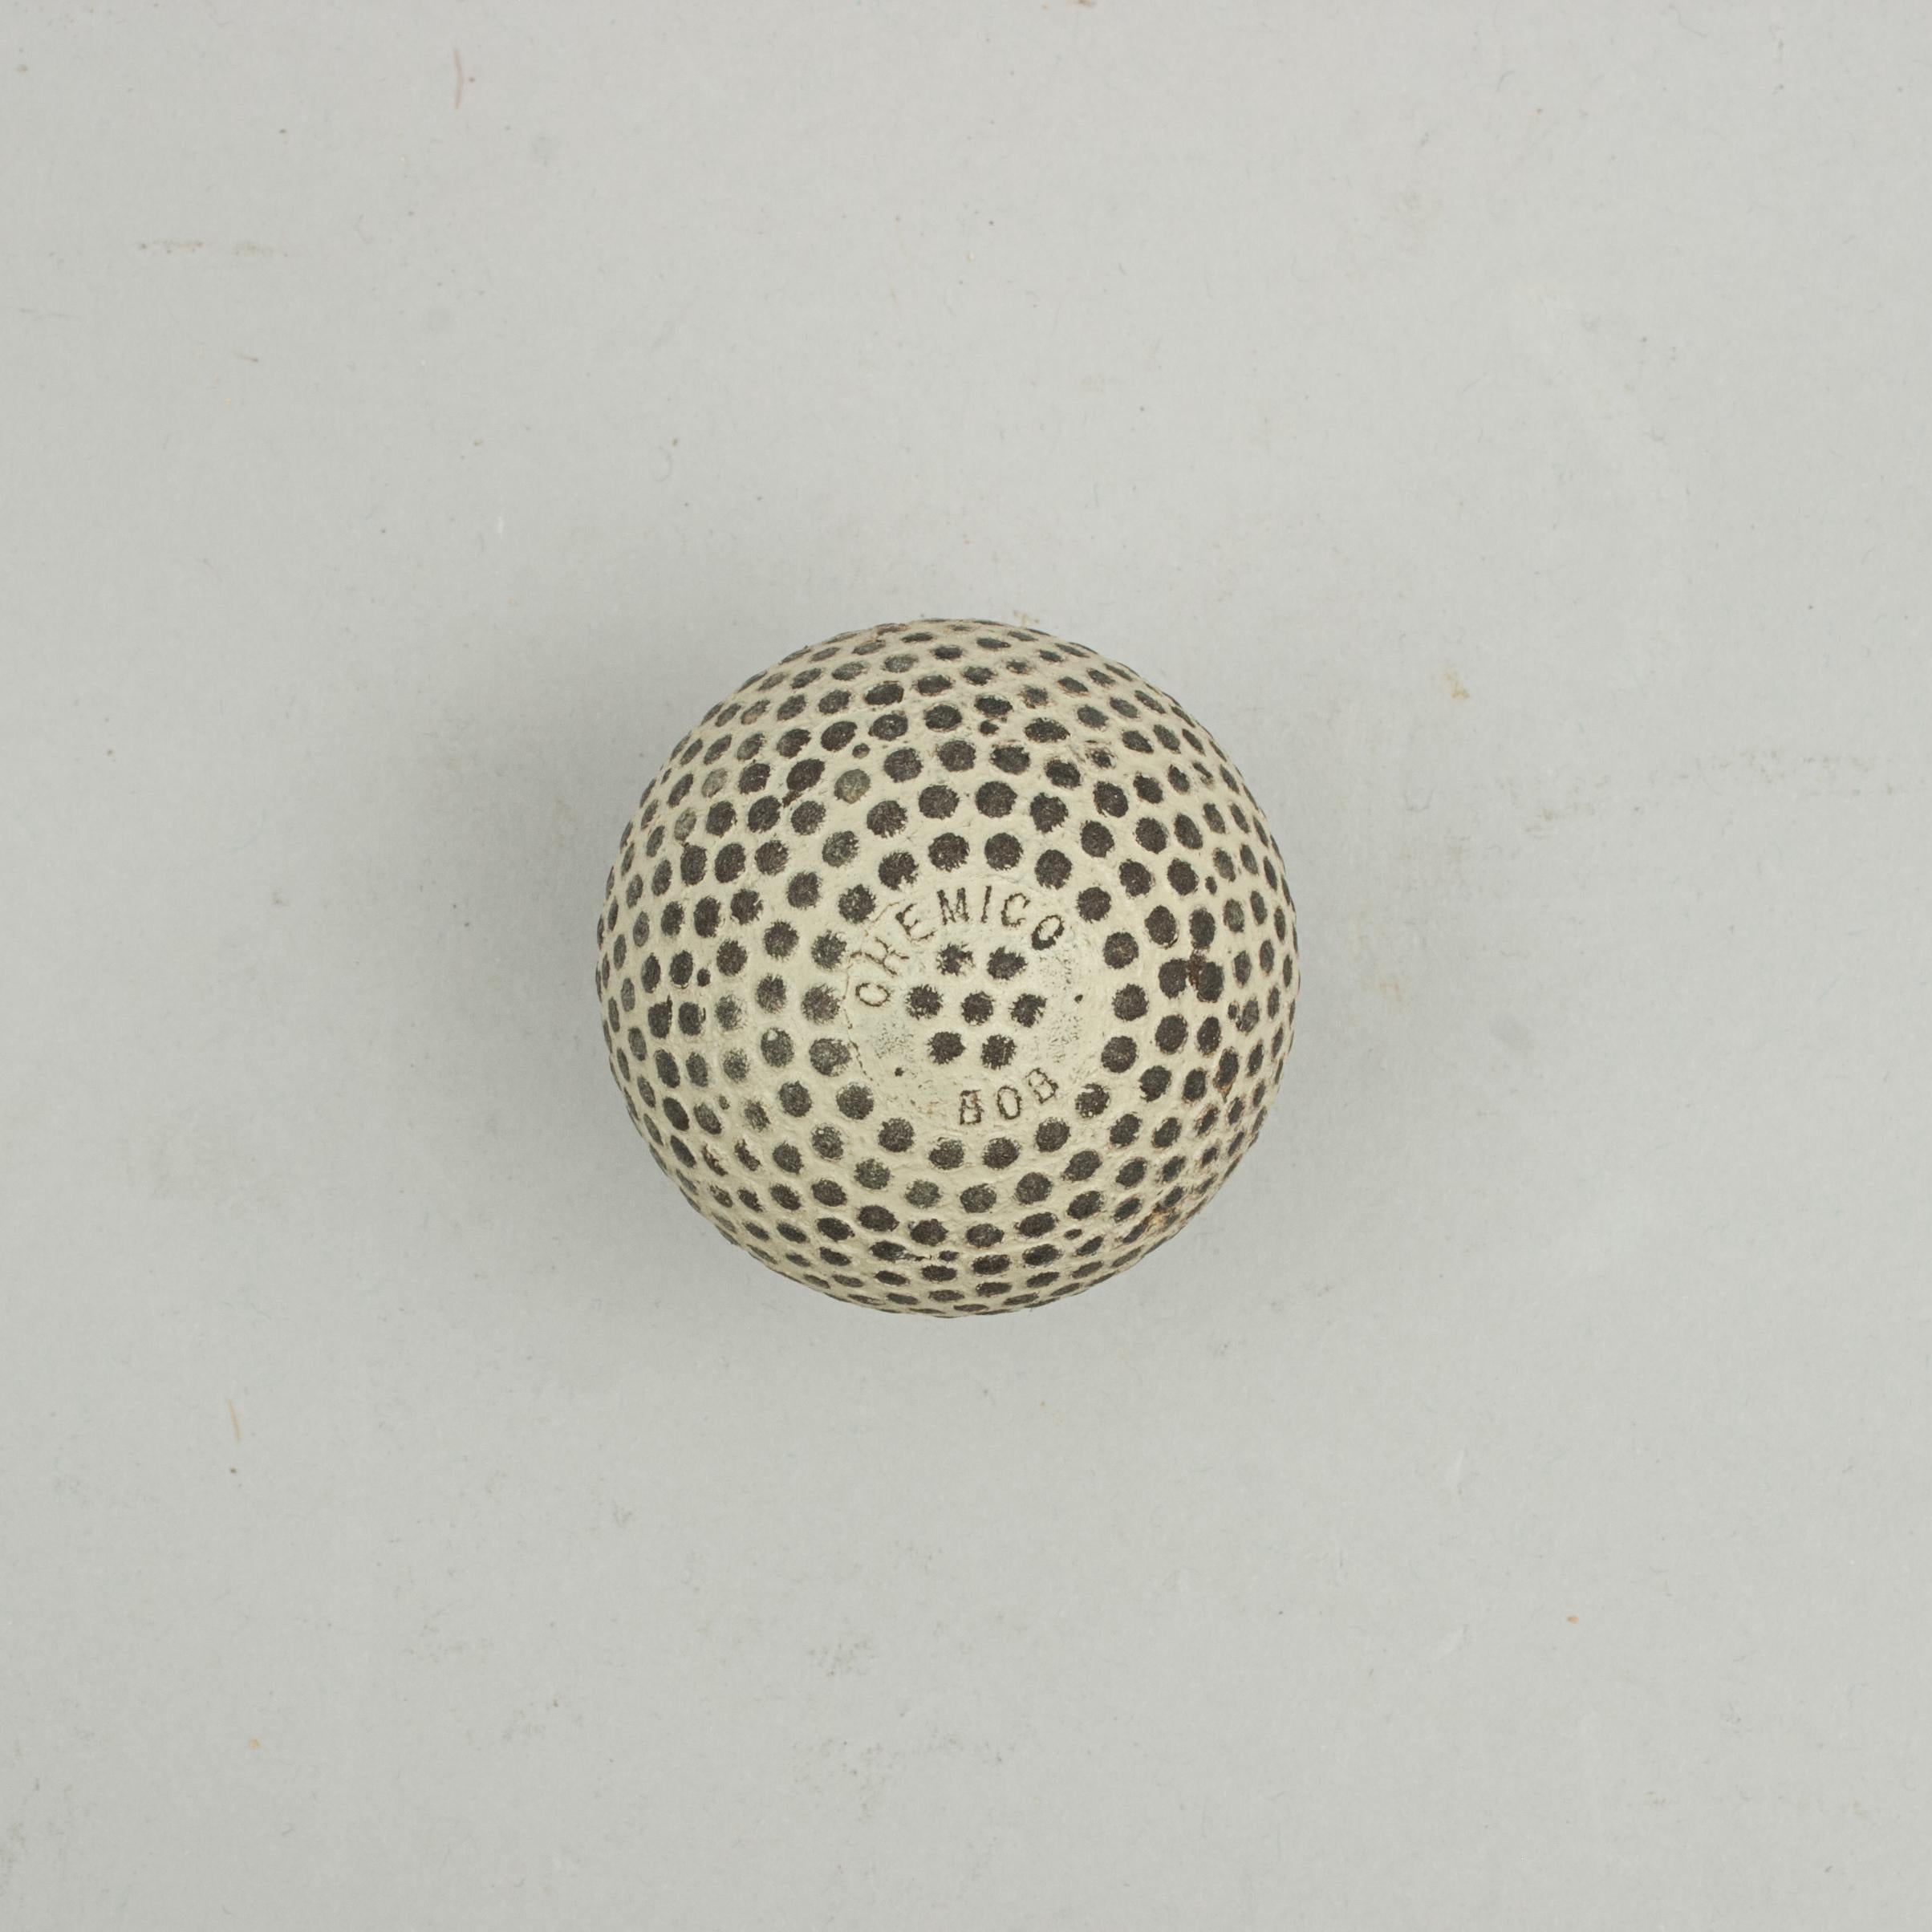 Bramble Pattern Golf Ball, Chemico Bob.
A good bramble patterned rubber core golf ball in used condition. The ball is marked 